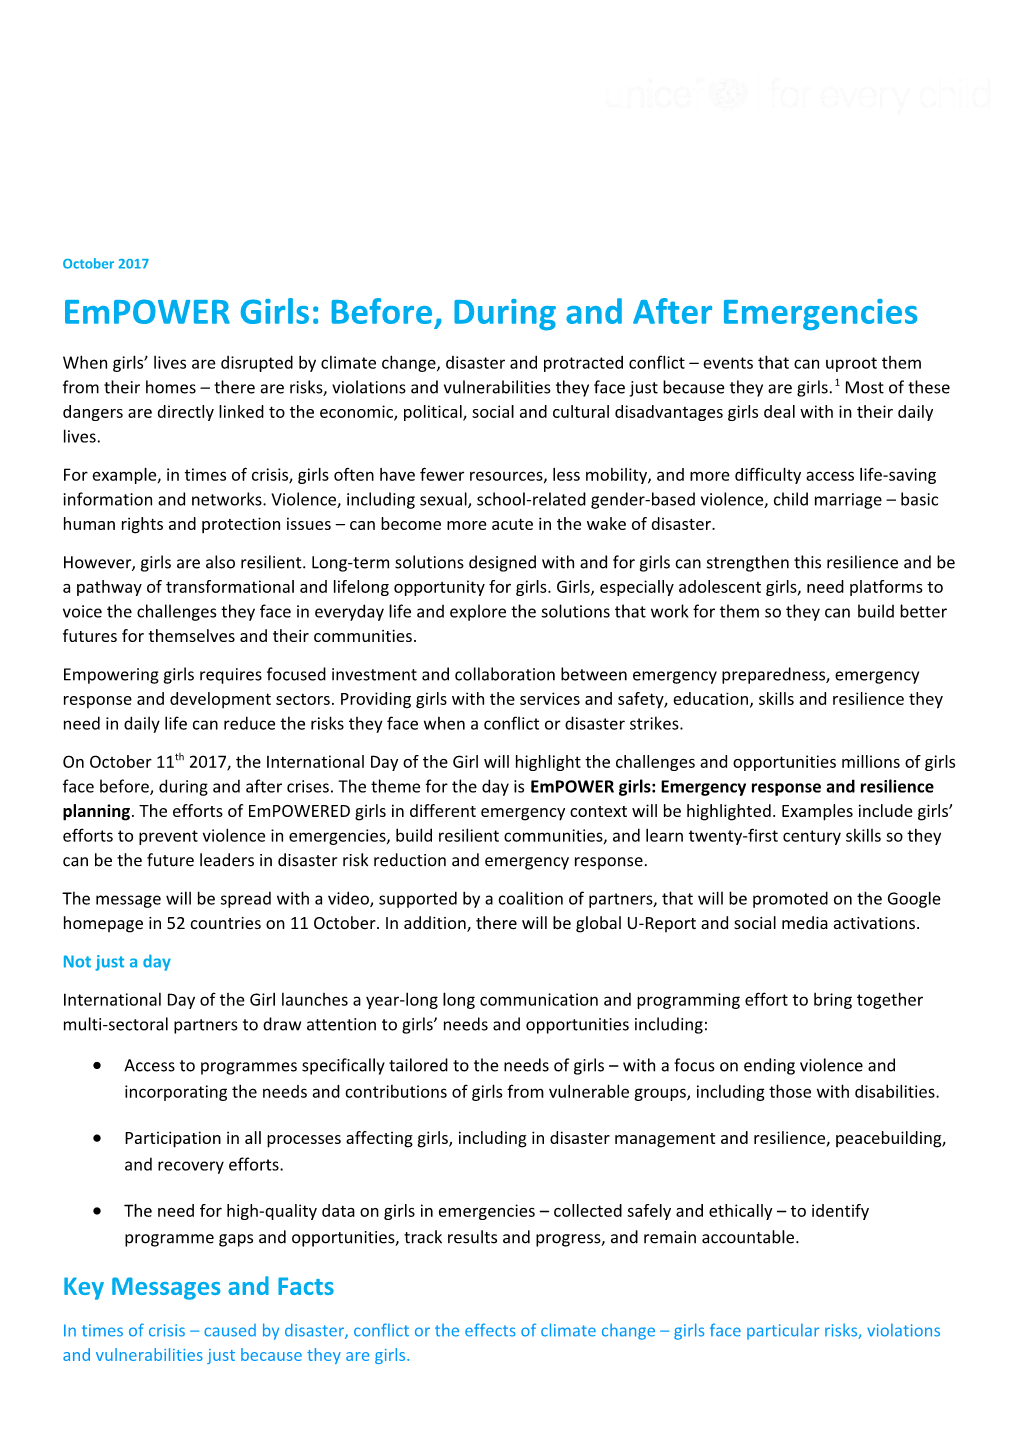 Empower Girls: Before, During and After Emergencies